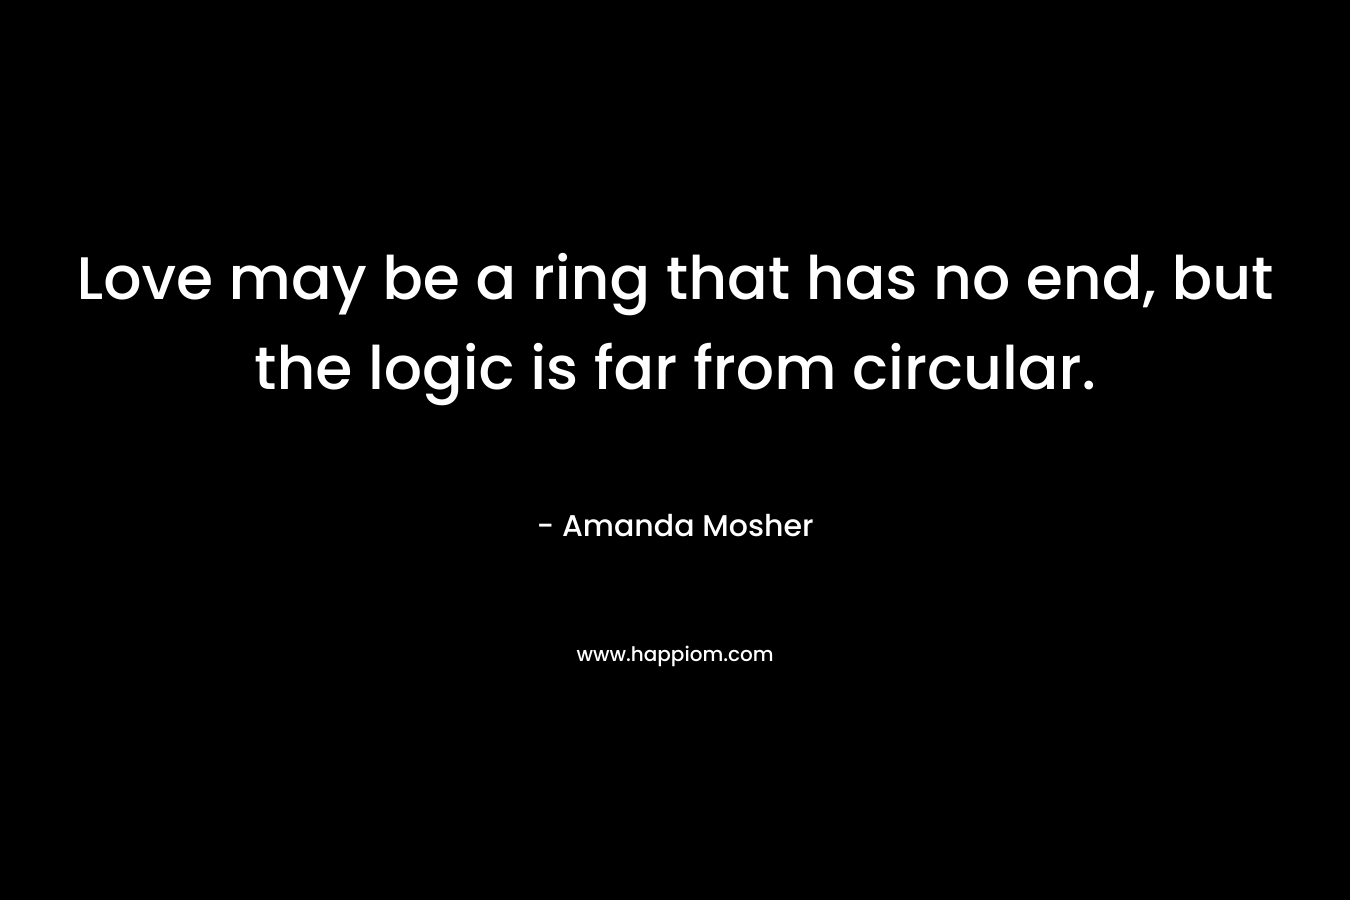 Love may be a ring that has no end, but the logic is far from circular. – Amanda Mosher